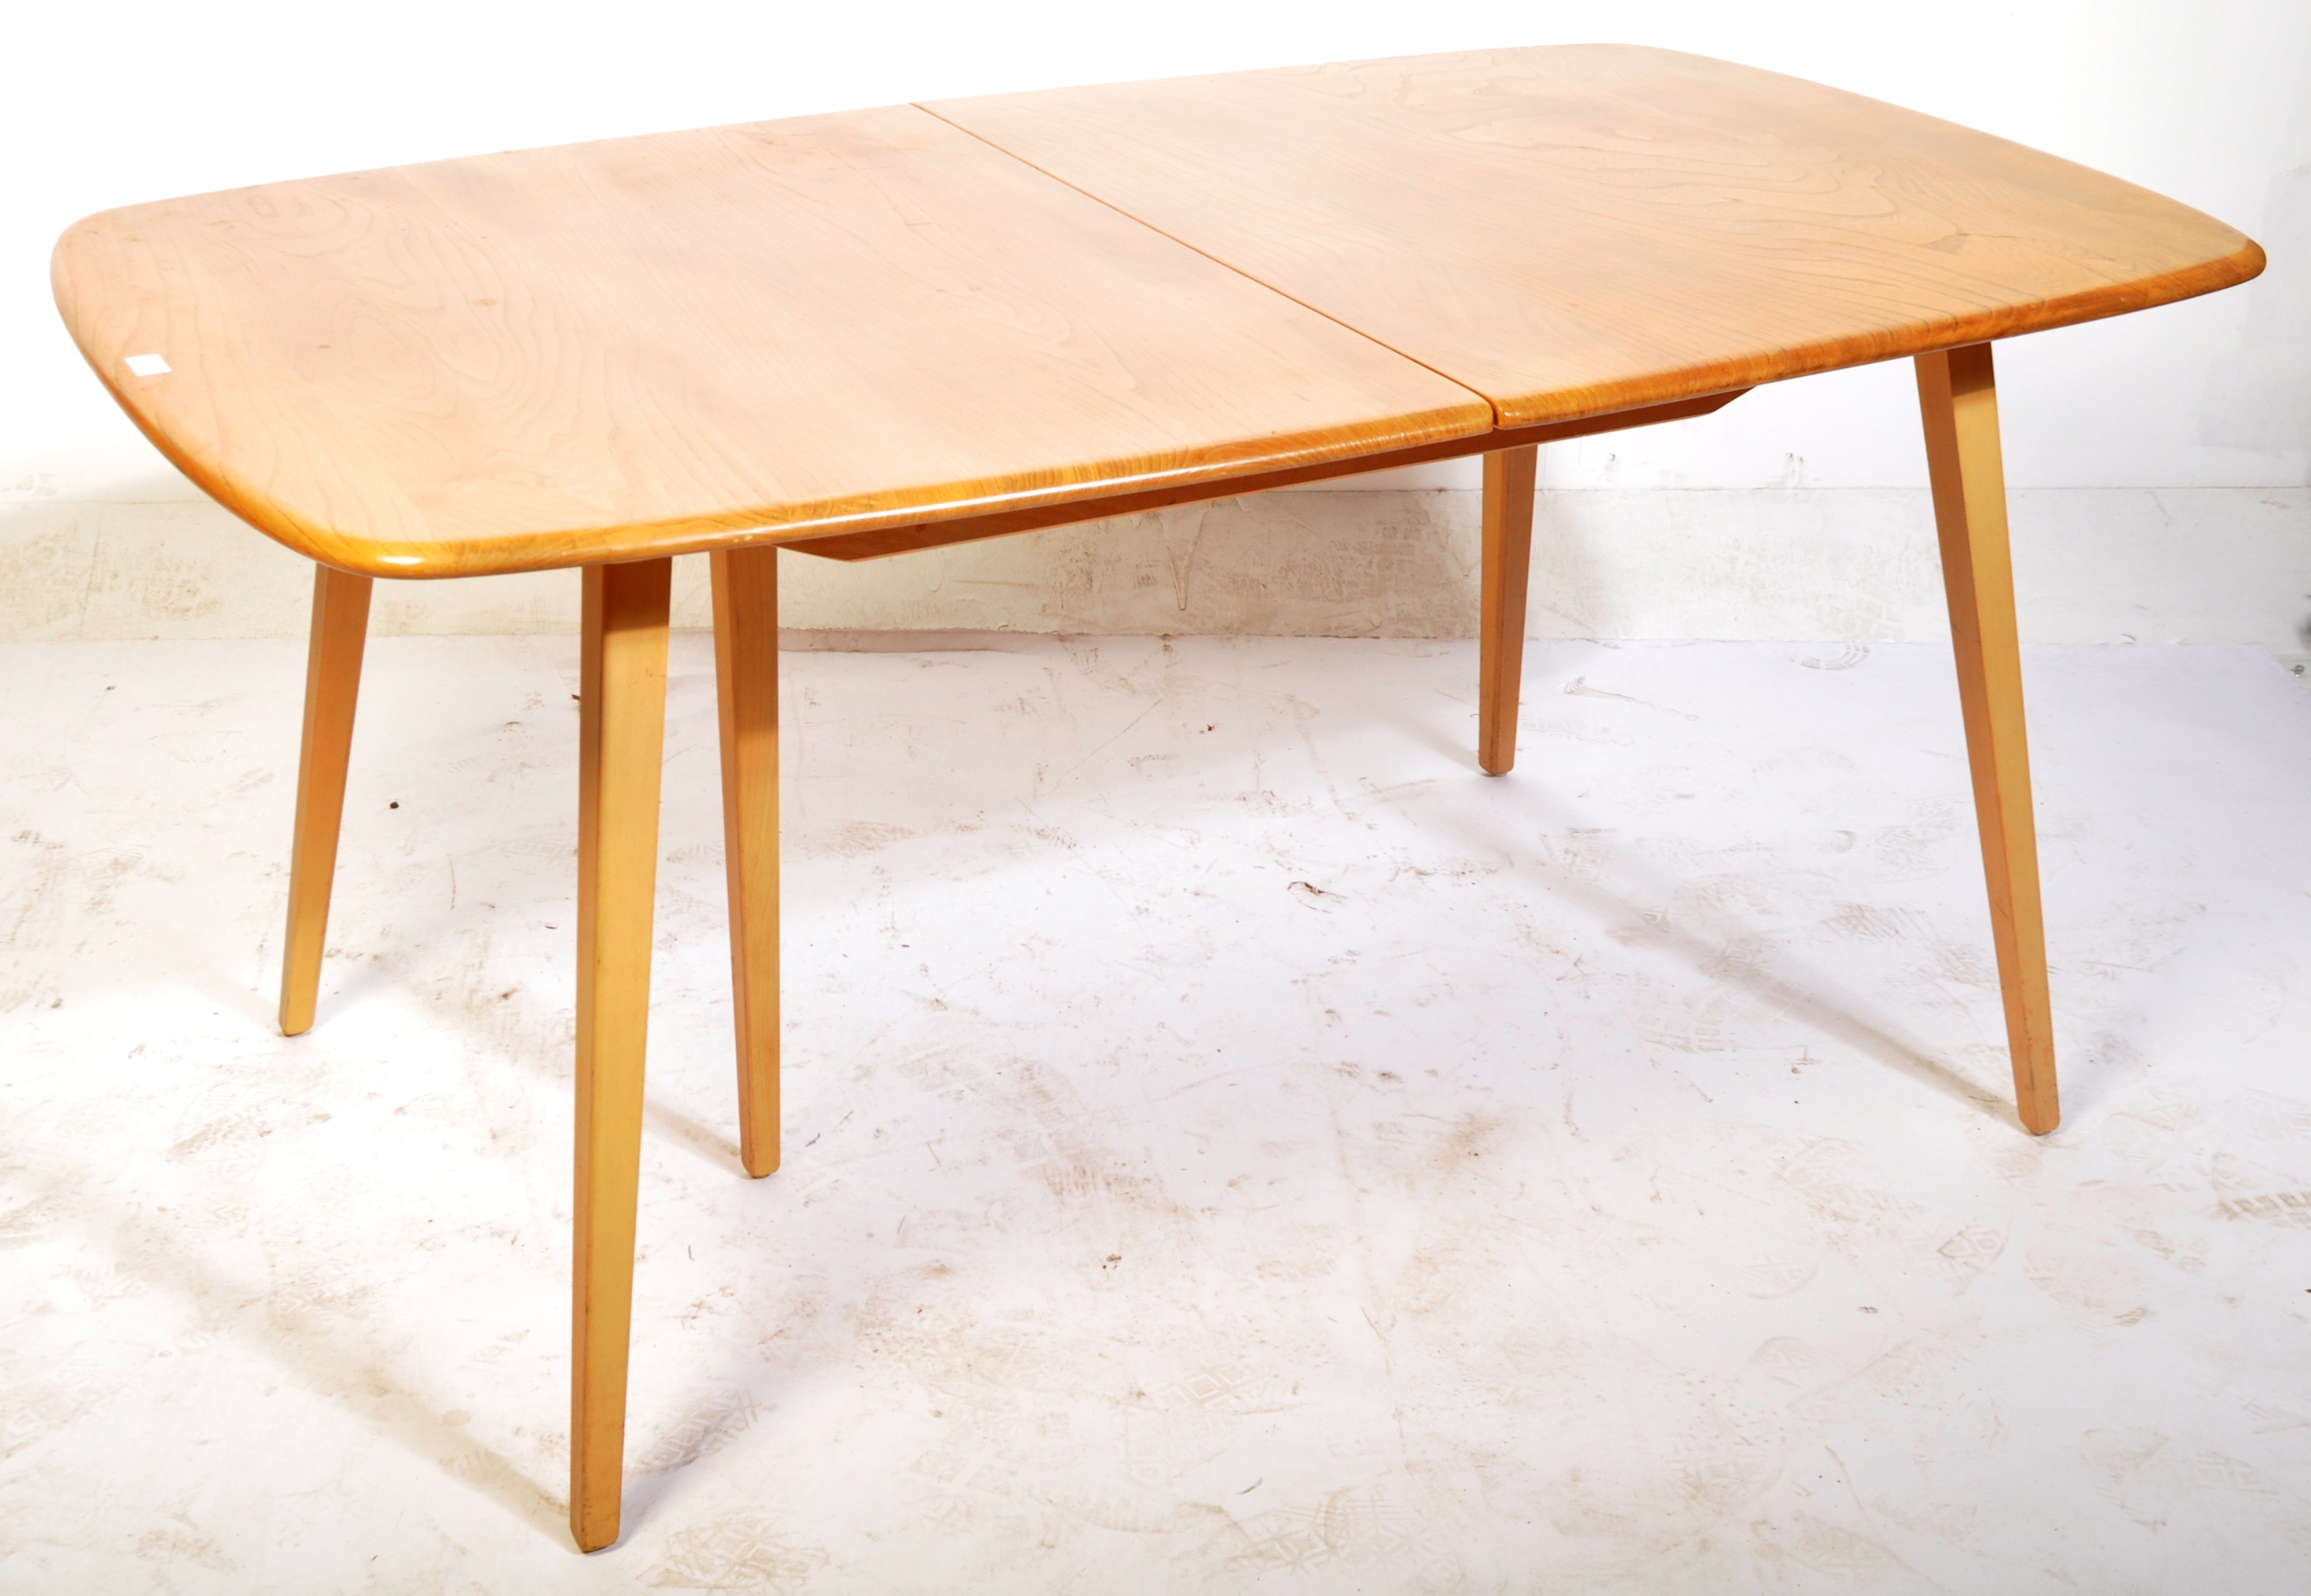 ERCOL GRAND PLANK EXTENDING BEECH AND ELM DINING TABLE - Image 3 of 6